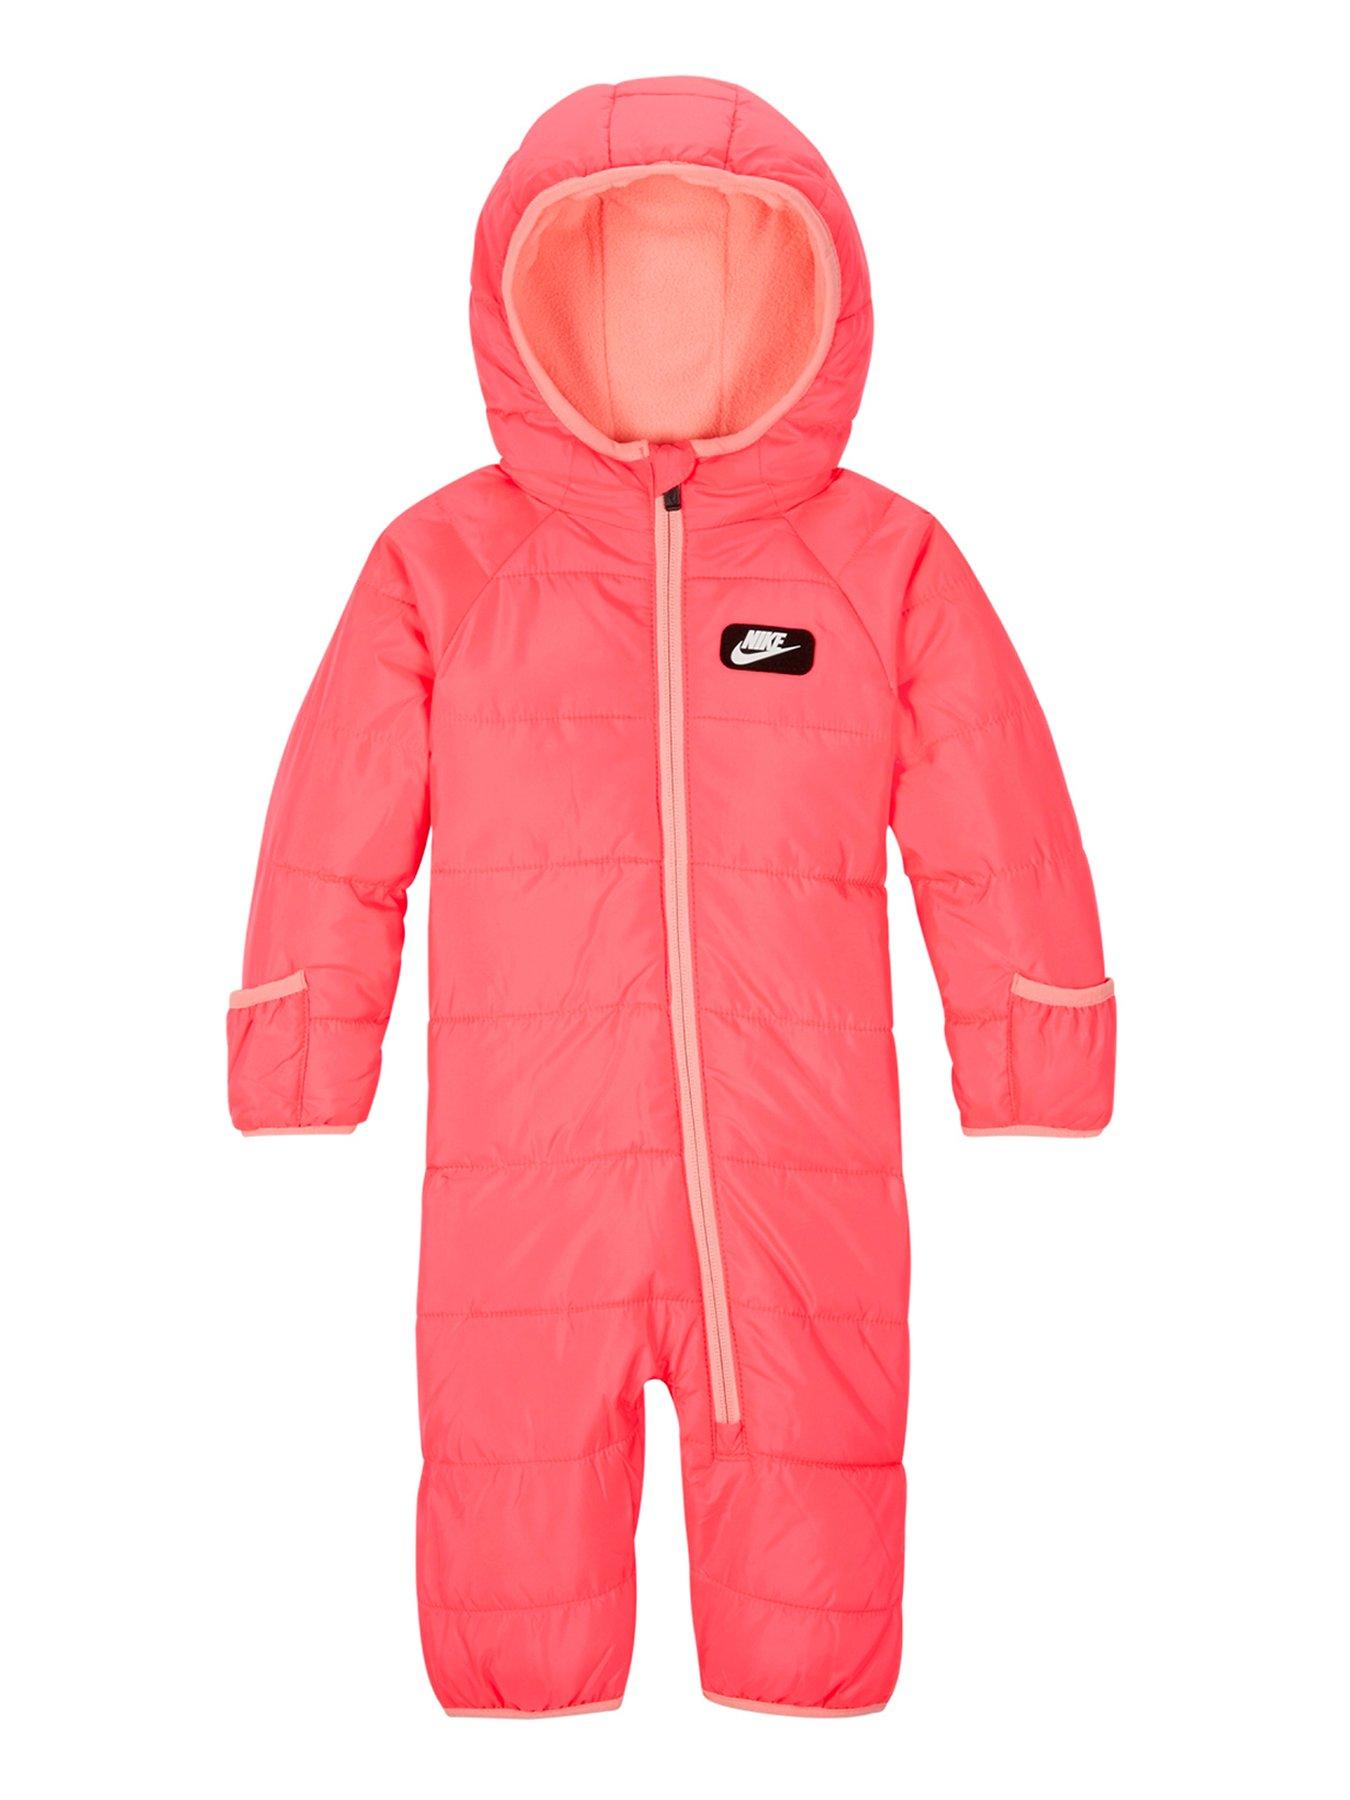 Kids Younger Baby Boy Baby Snowsuit